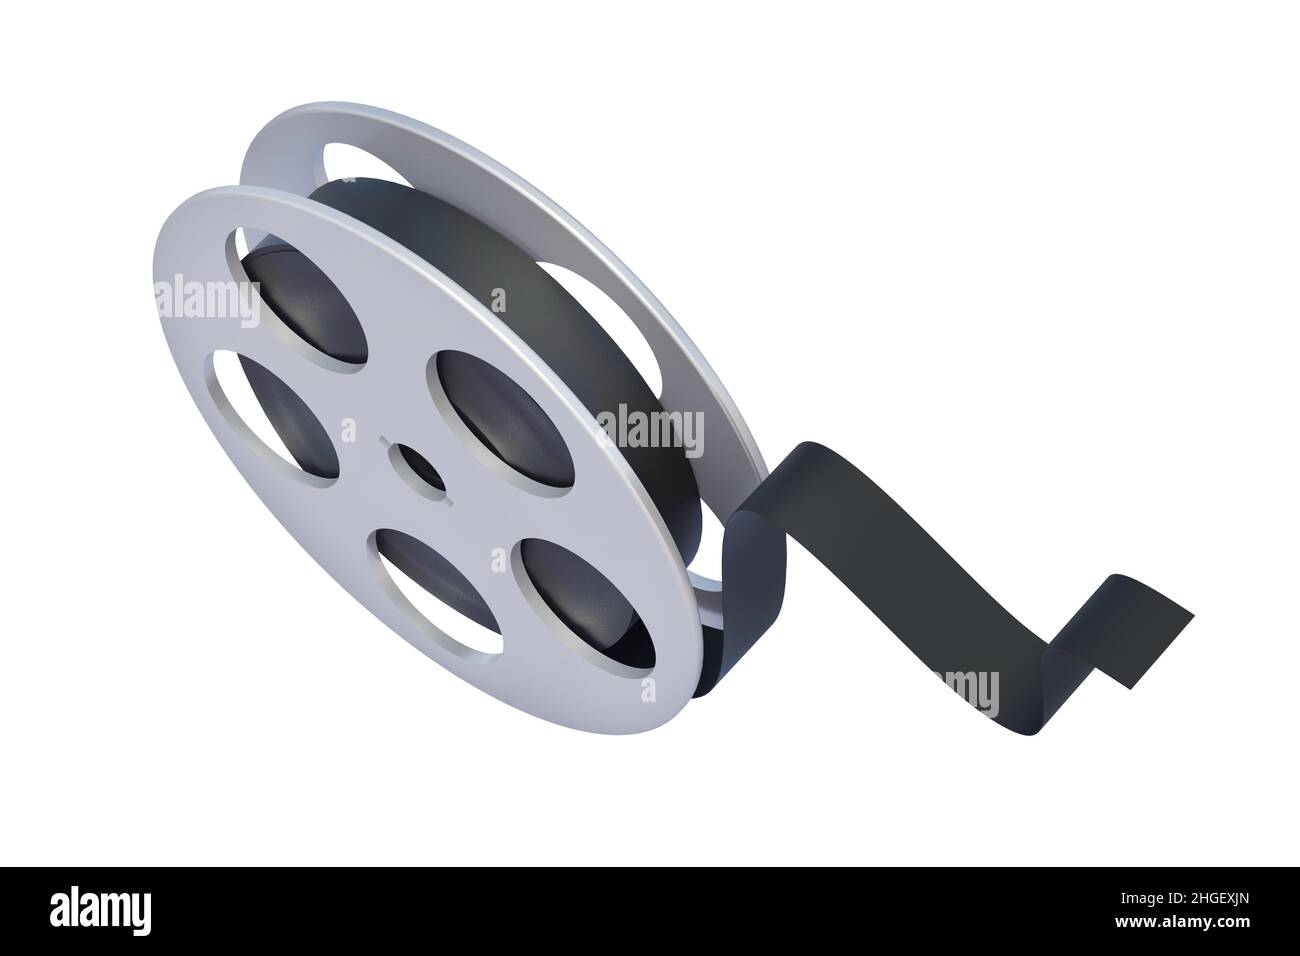 Old metal movie film reel Cut Out Stock Images & Pictures - Page 3